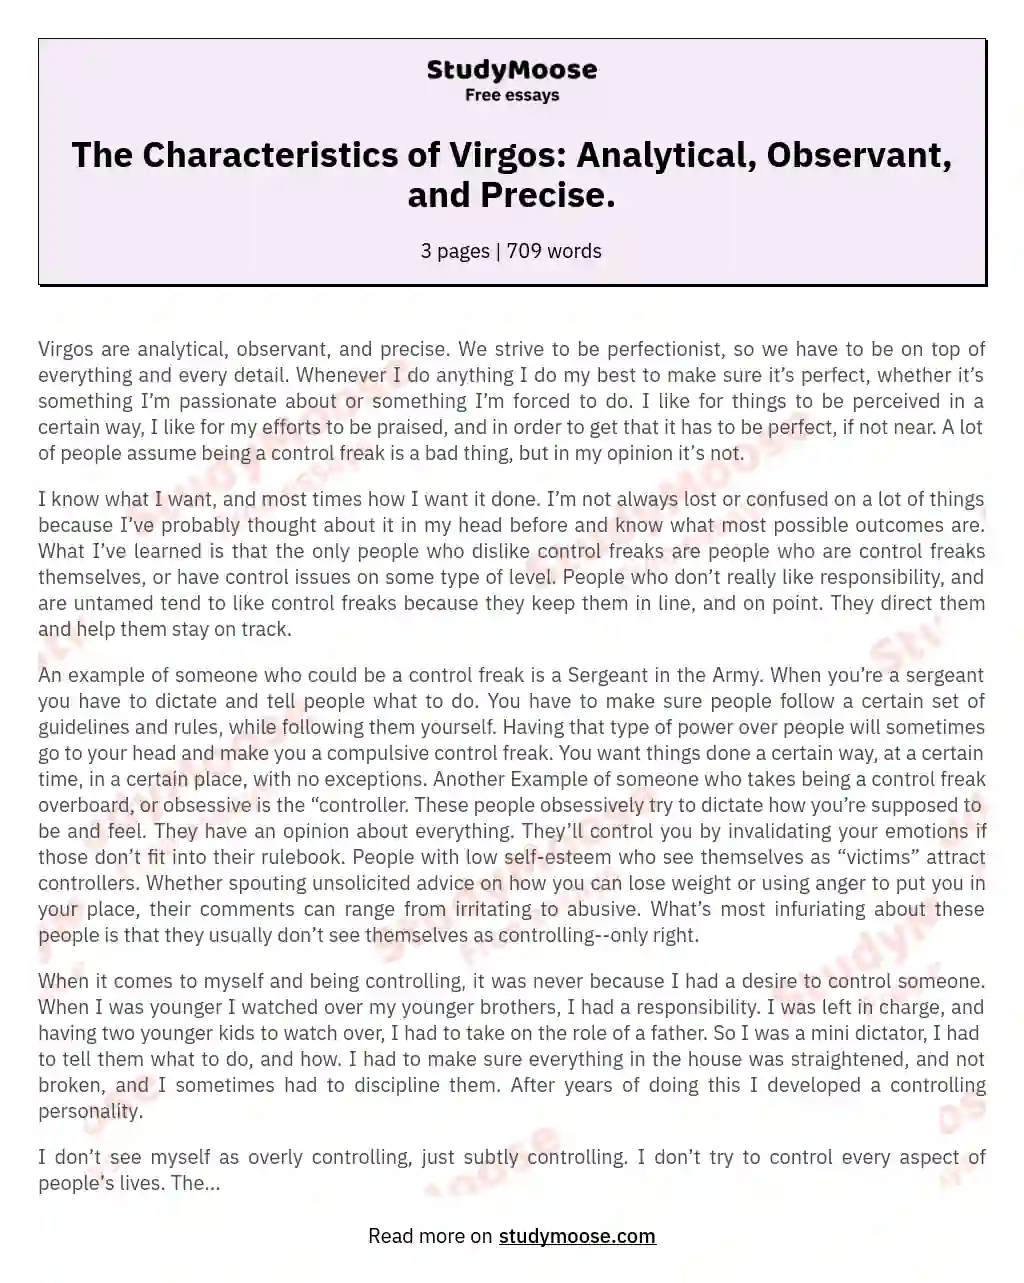 The Characteristics of Virgos: Analytical, Observant, and Precise. essay